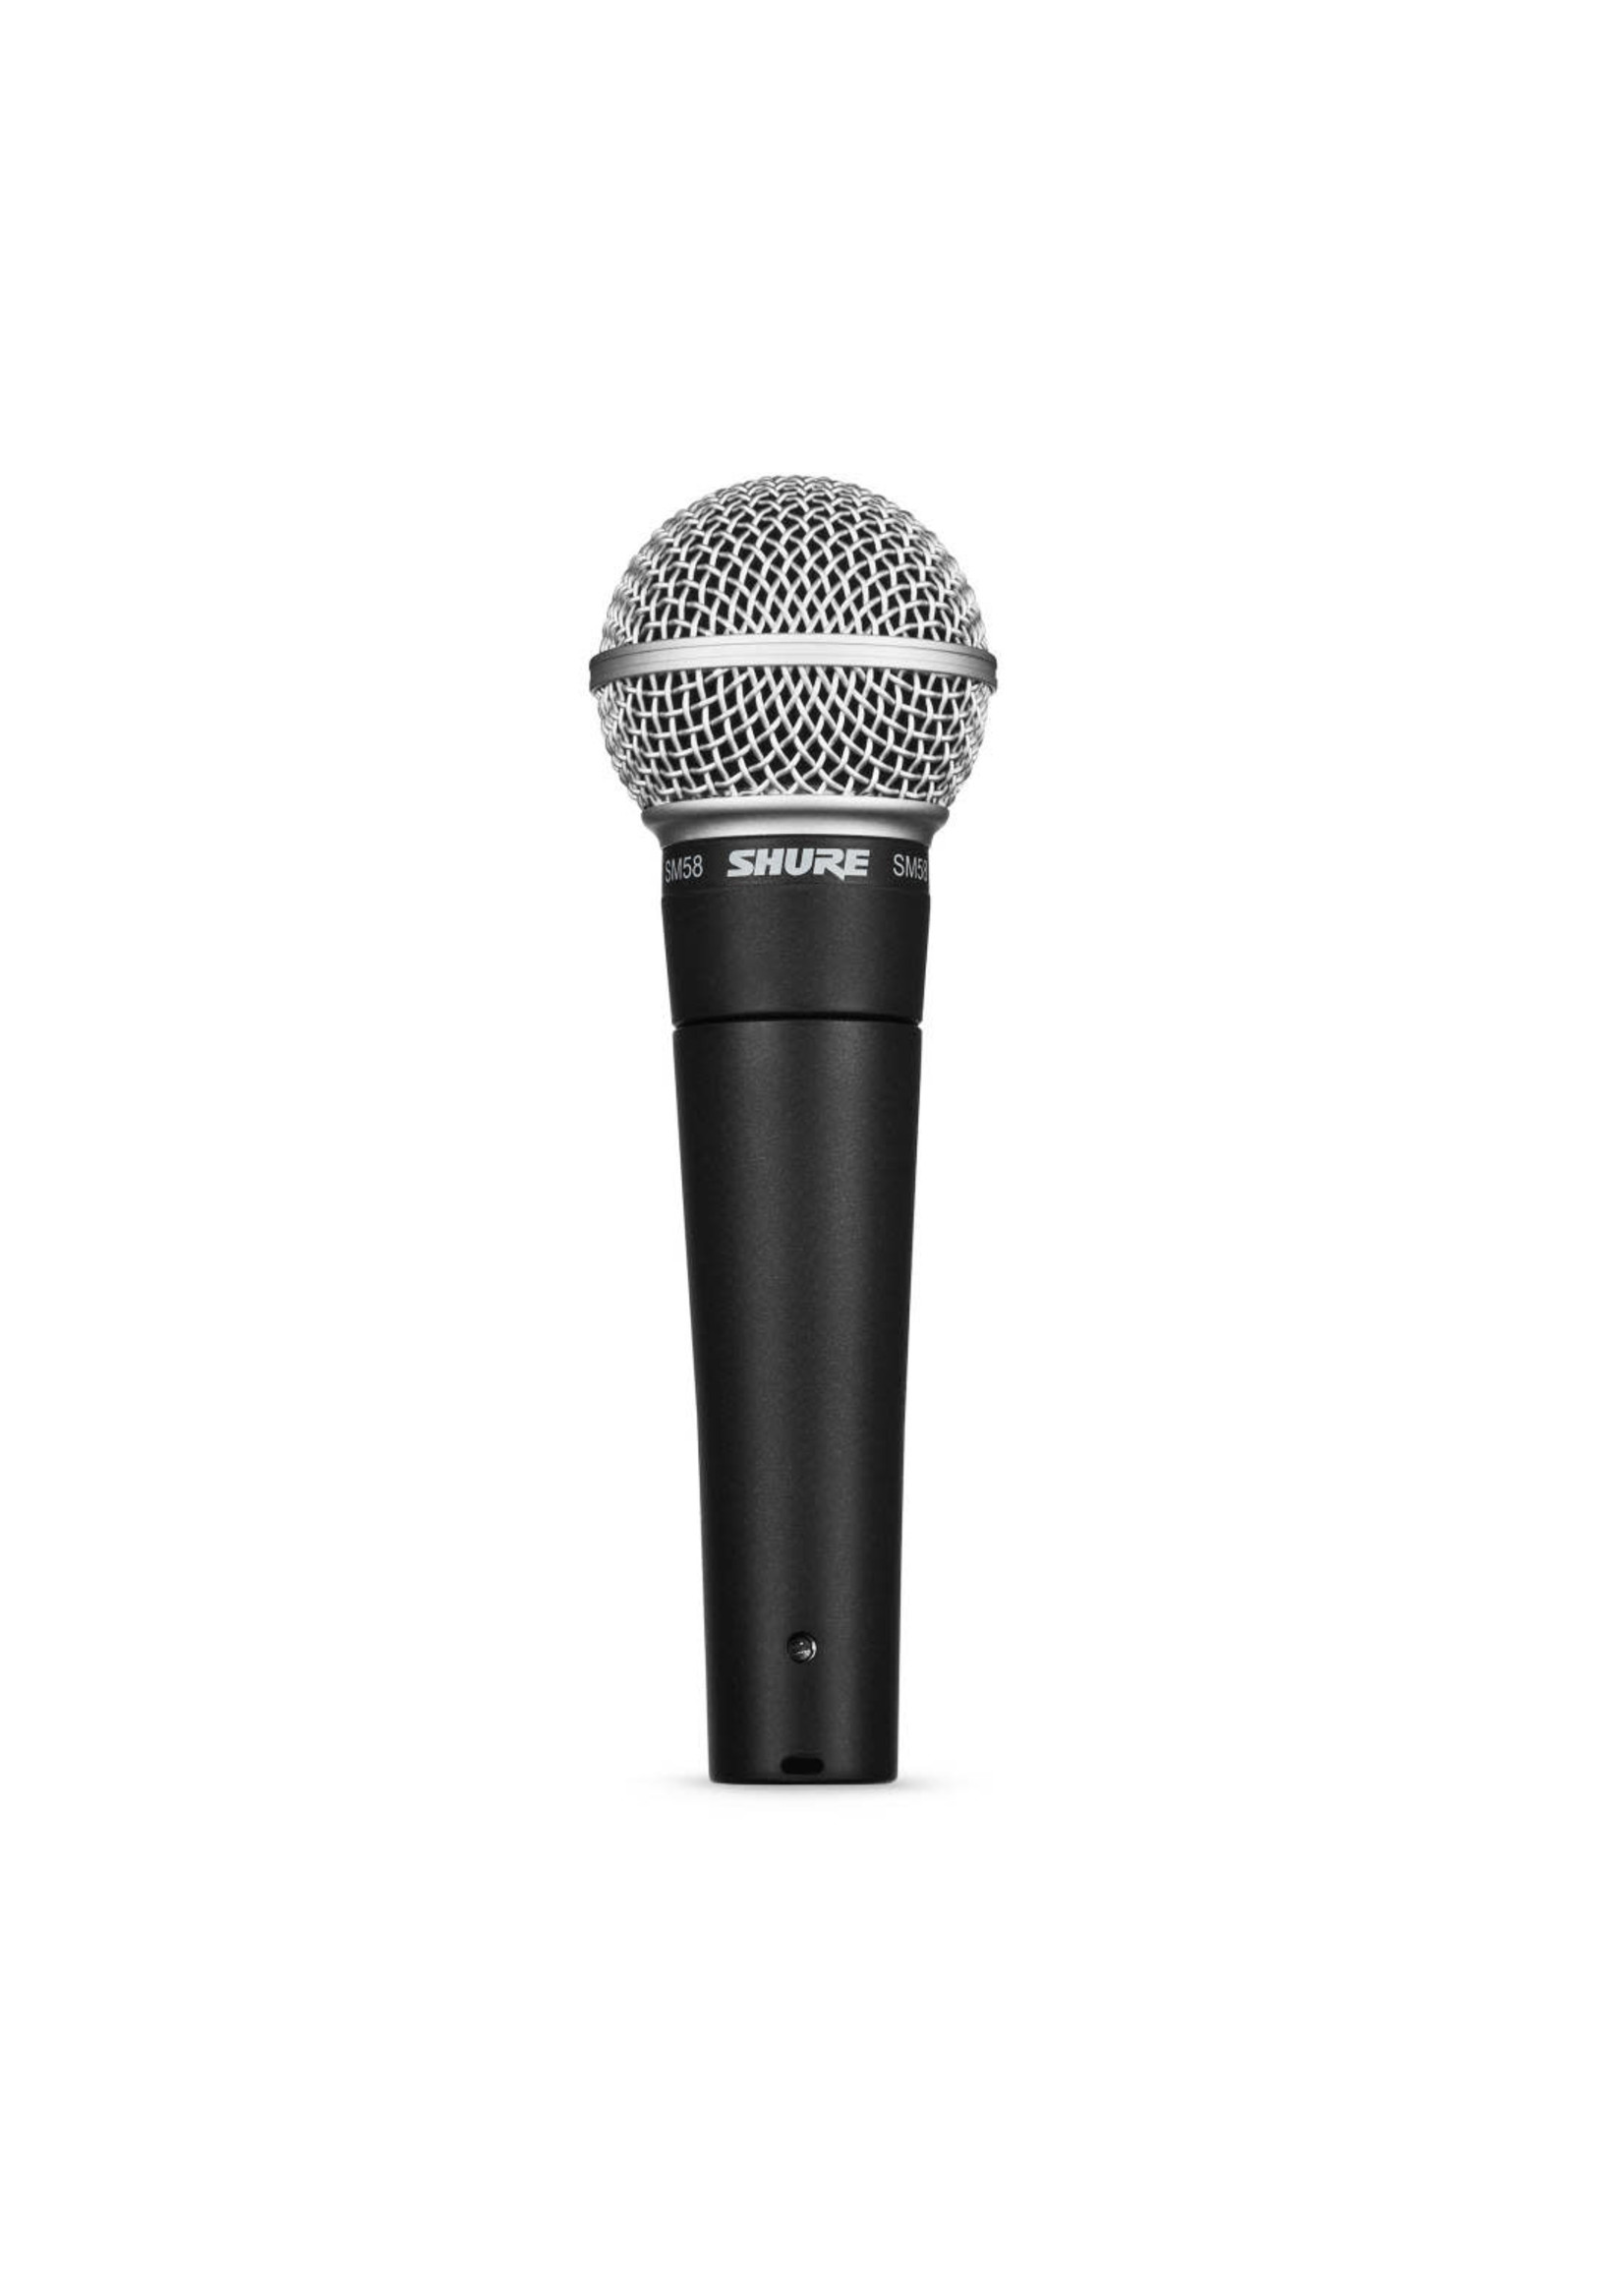 Shure Shure SM58 Unidirectional/Cardioid Dynamic Microphone